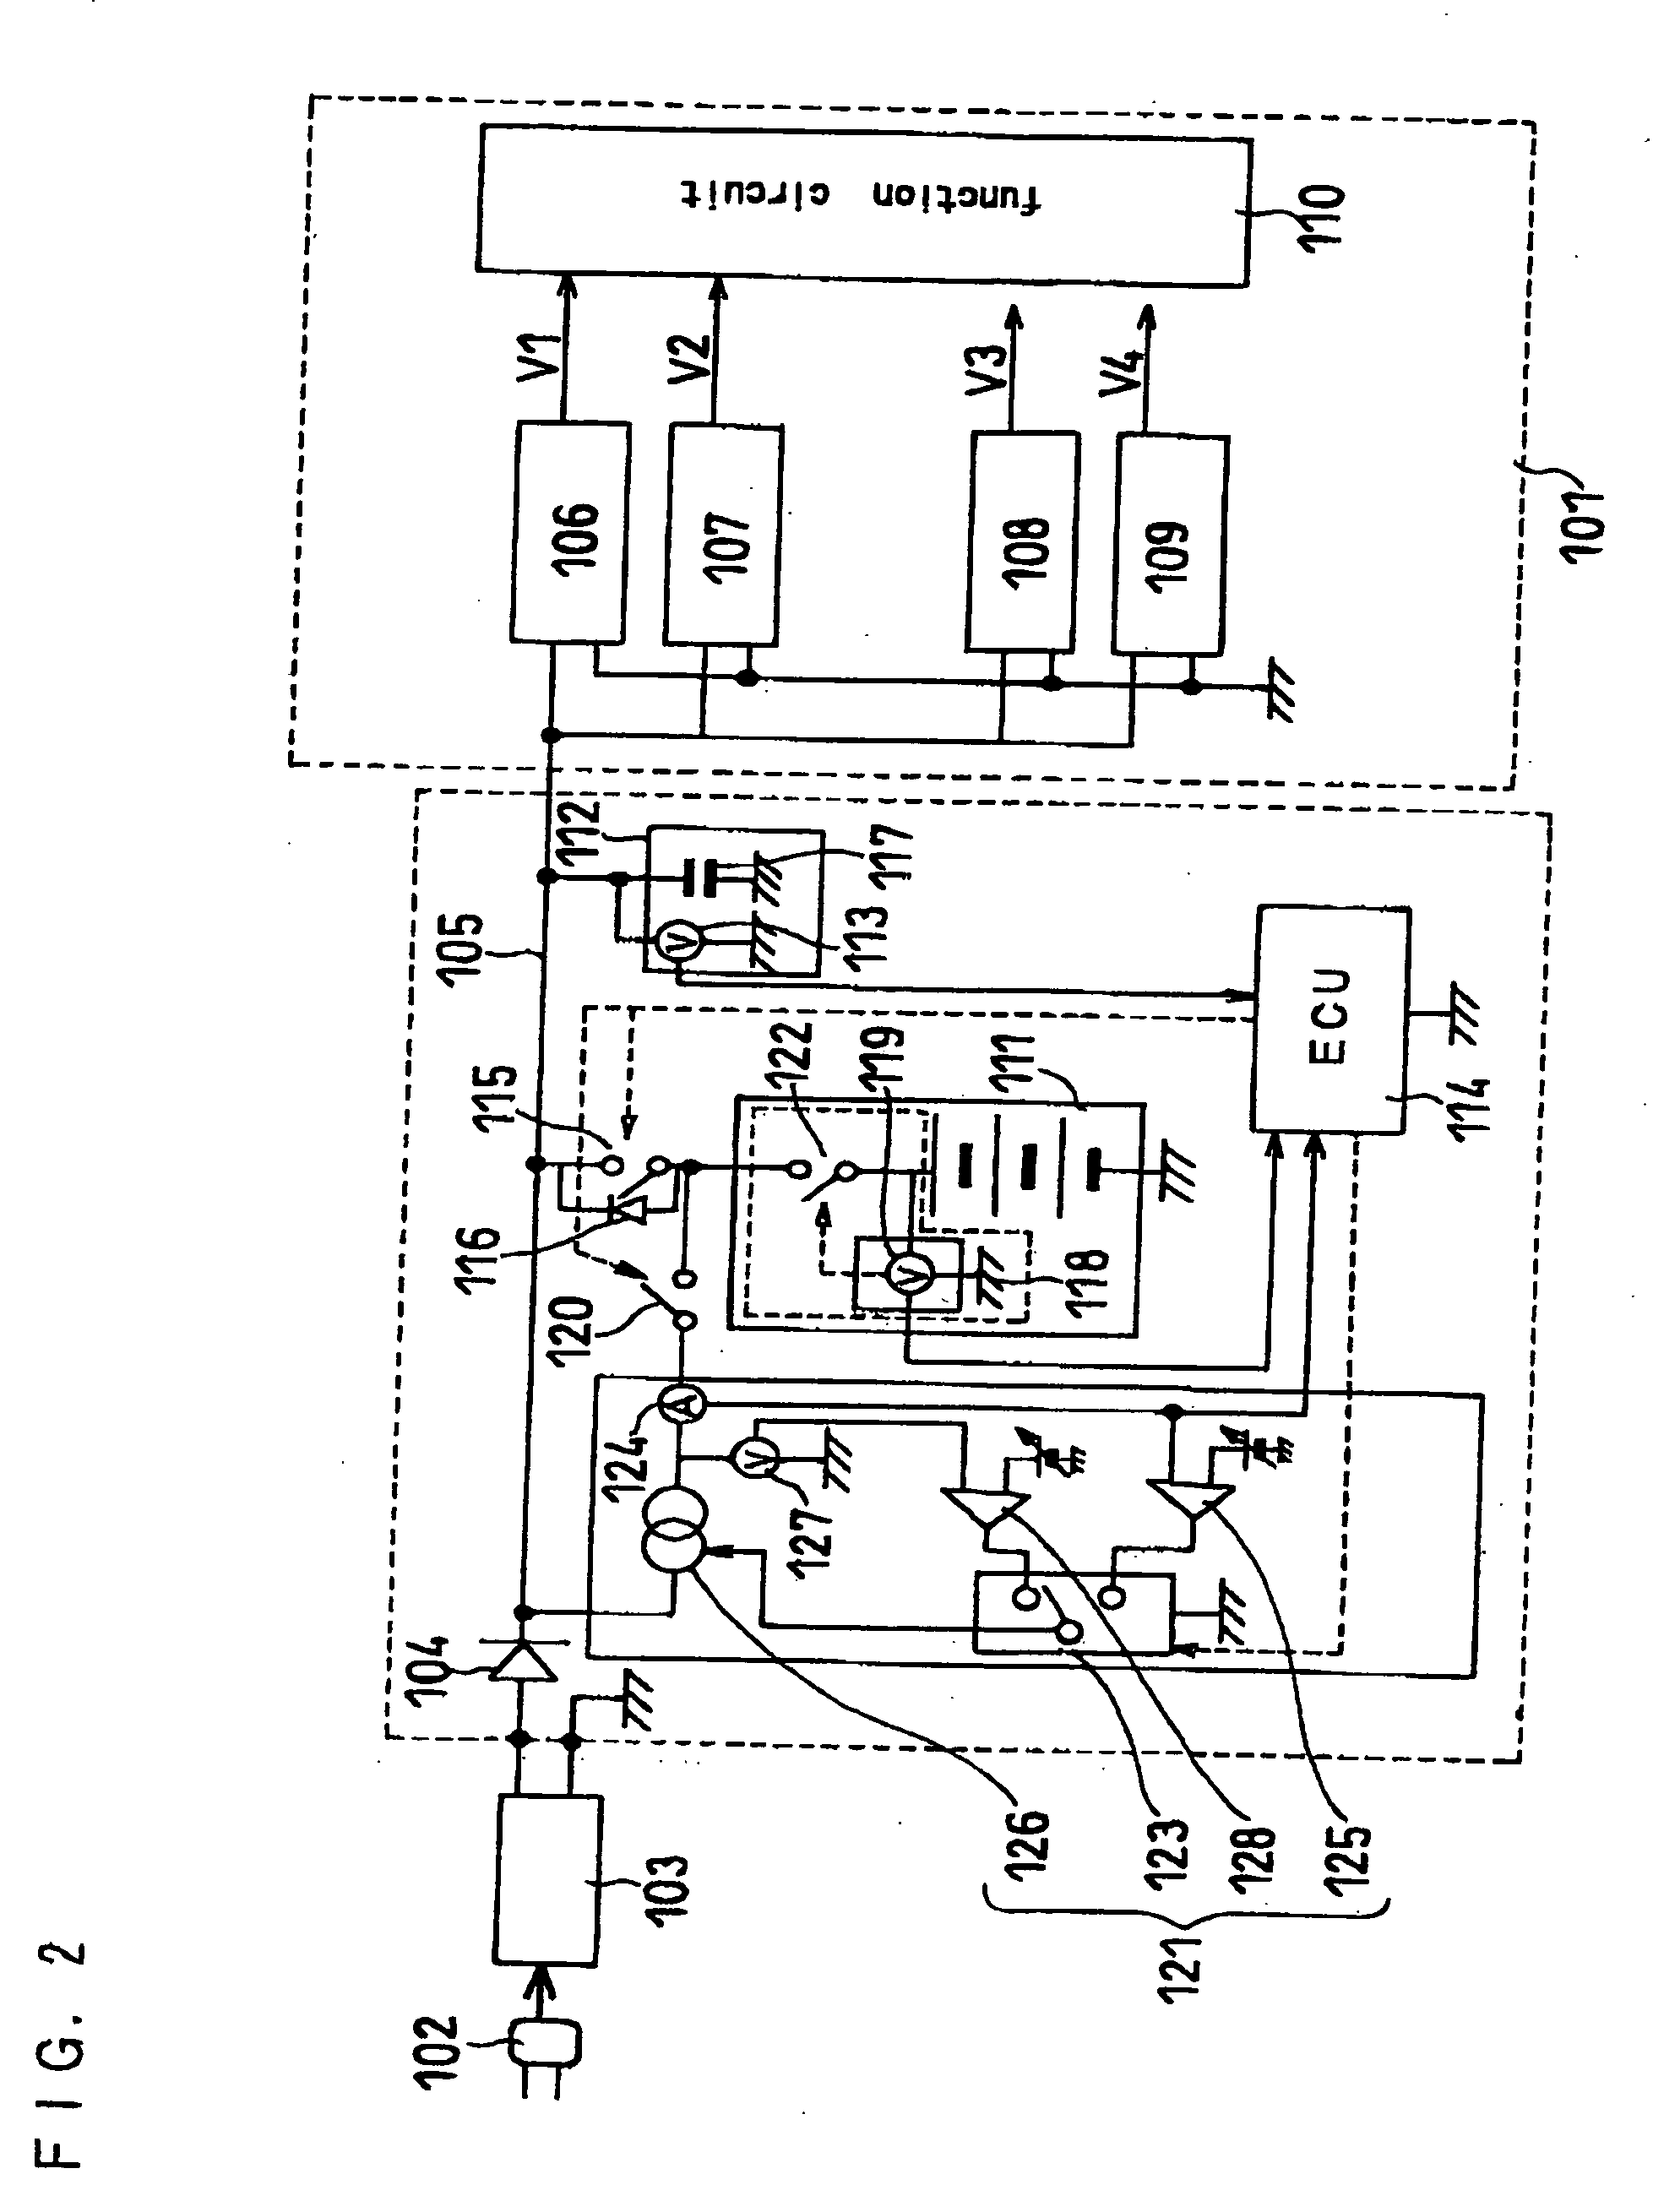 Lithium ion secondary battery and charging method therefor, and charge or charge/discharge control system for lithium ion secondary battery